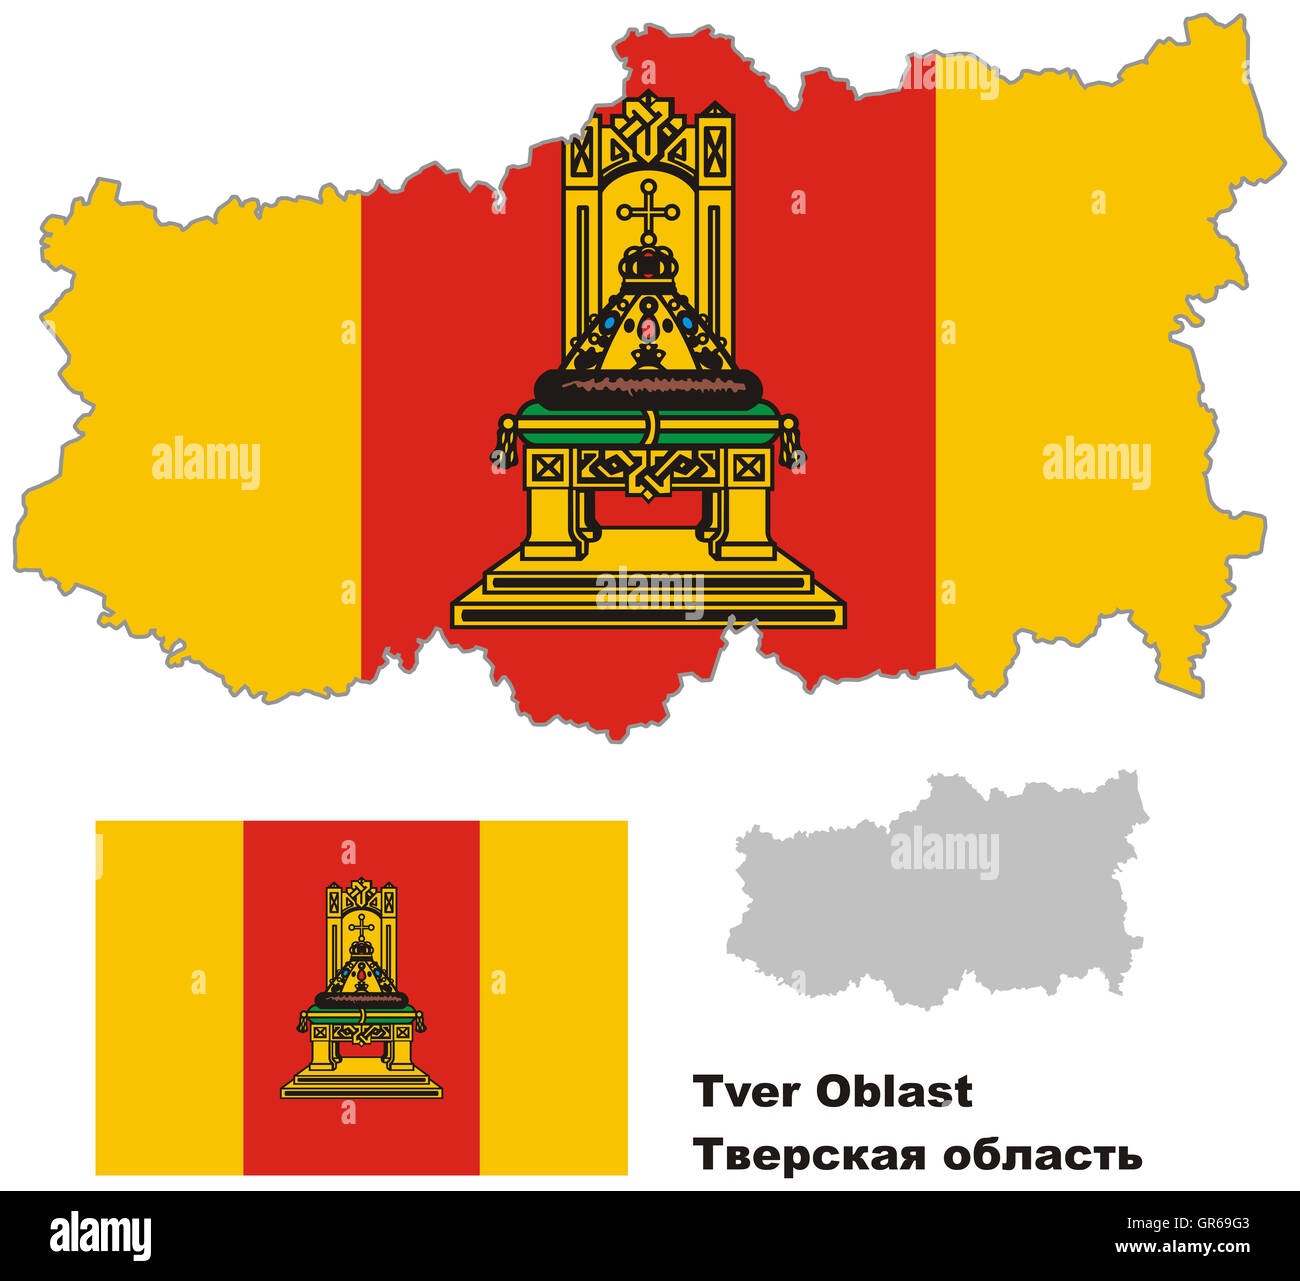 Outline map of Tver Oblast with flag. Regions of Russia. Vector illustration. Stock Photo